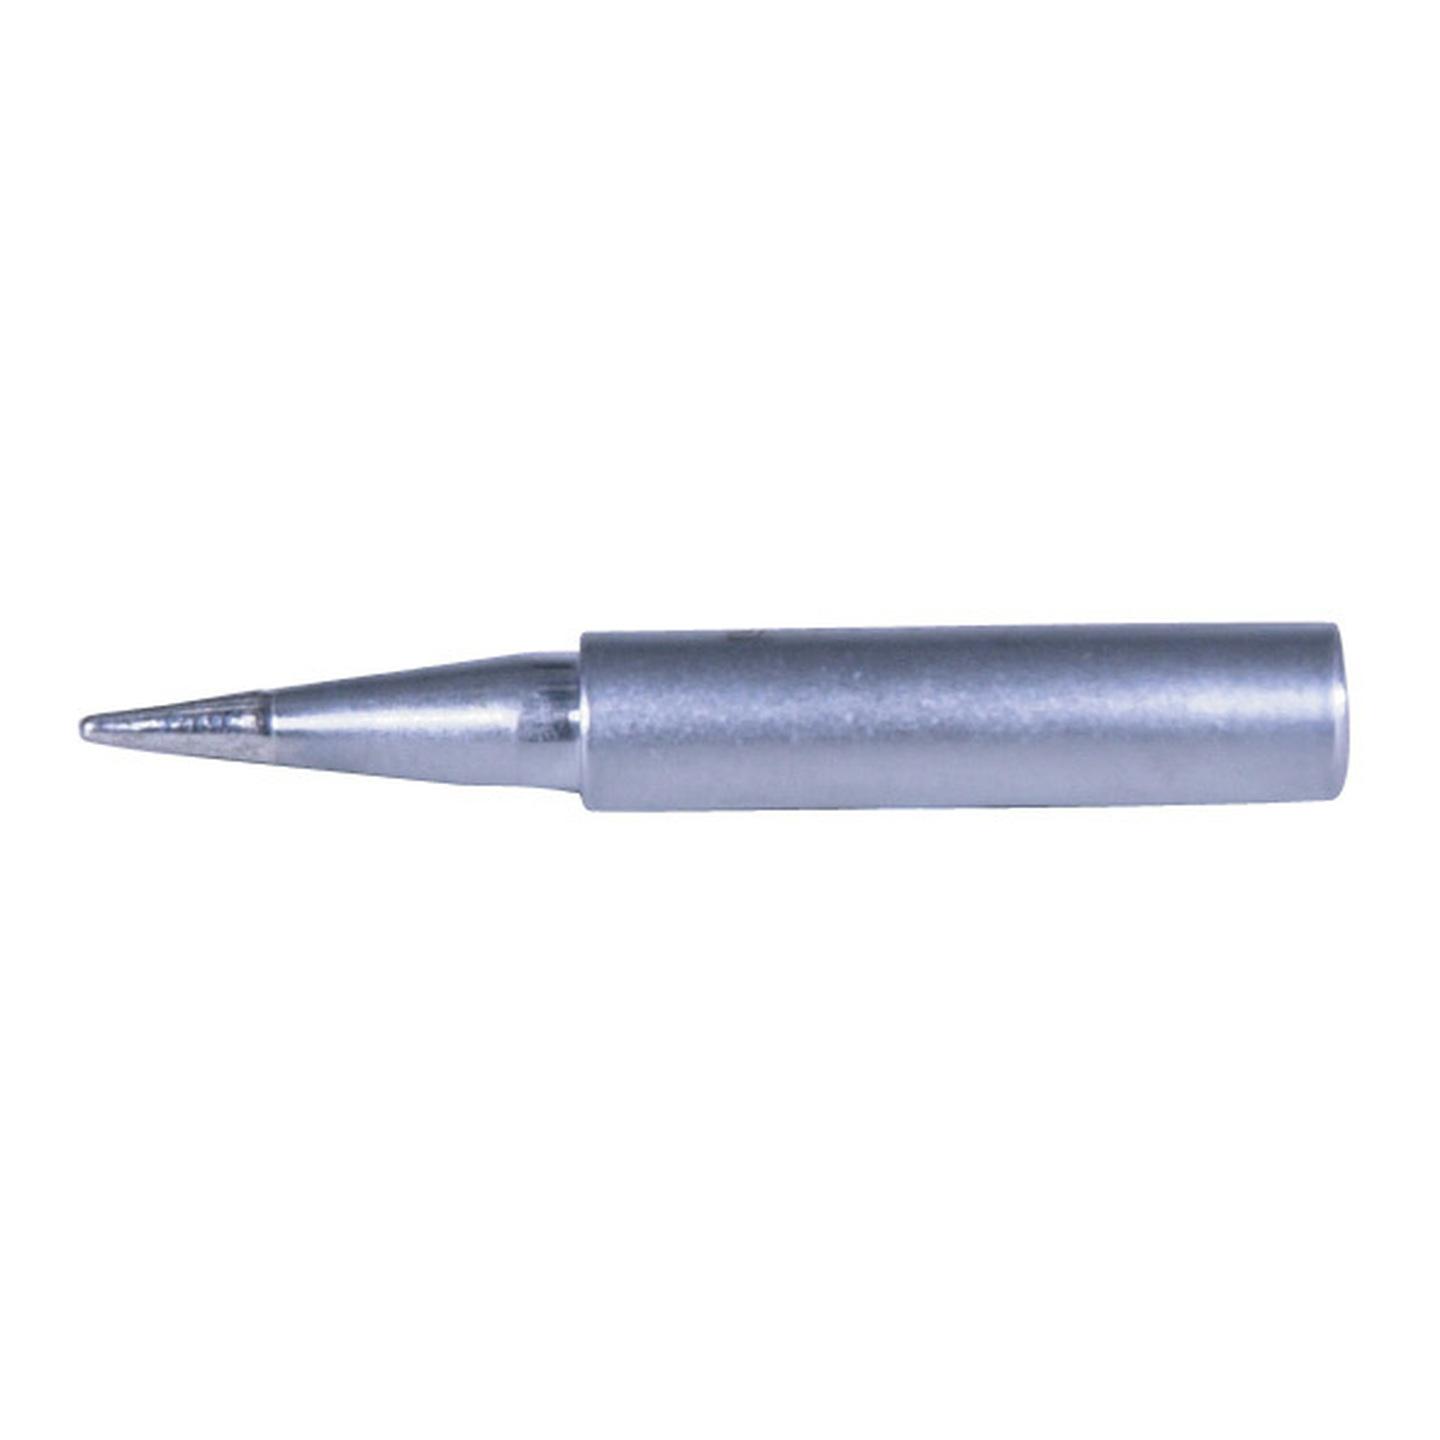 0.2mm Tip to suit TS1440 and TS1446